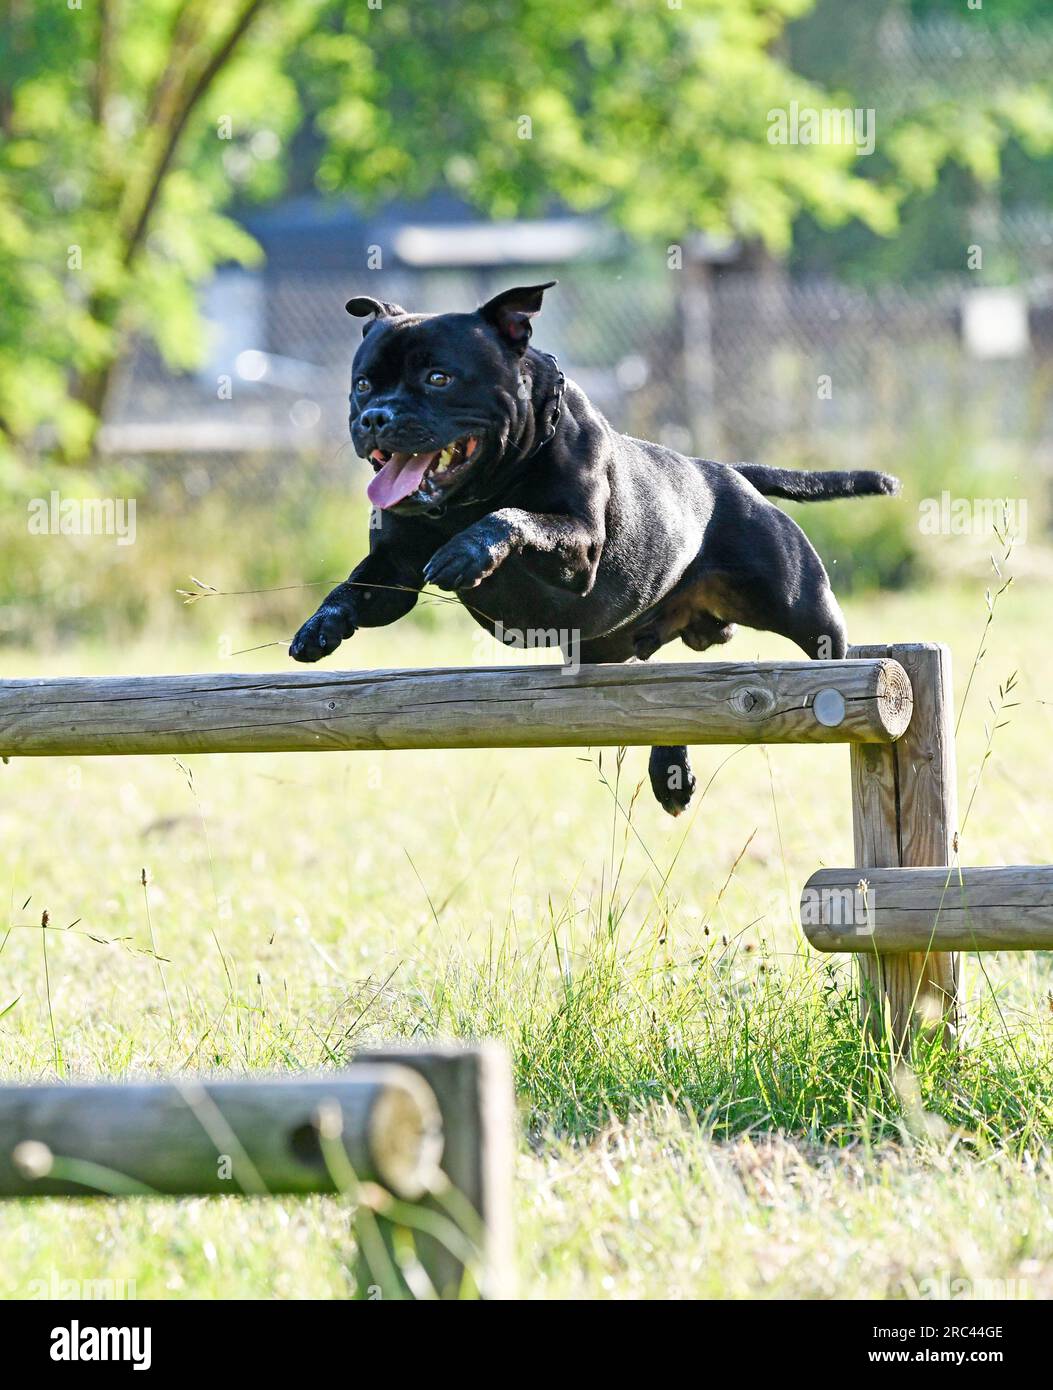 puppt staffordshire bull terrier free in a garden Stock Photo